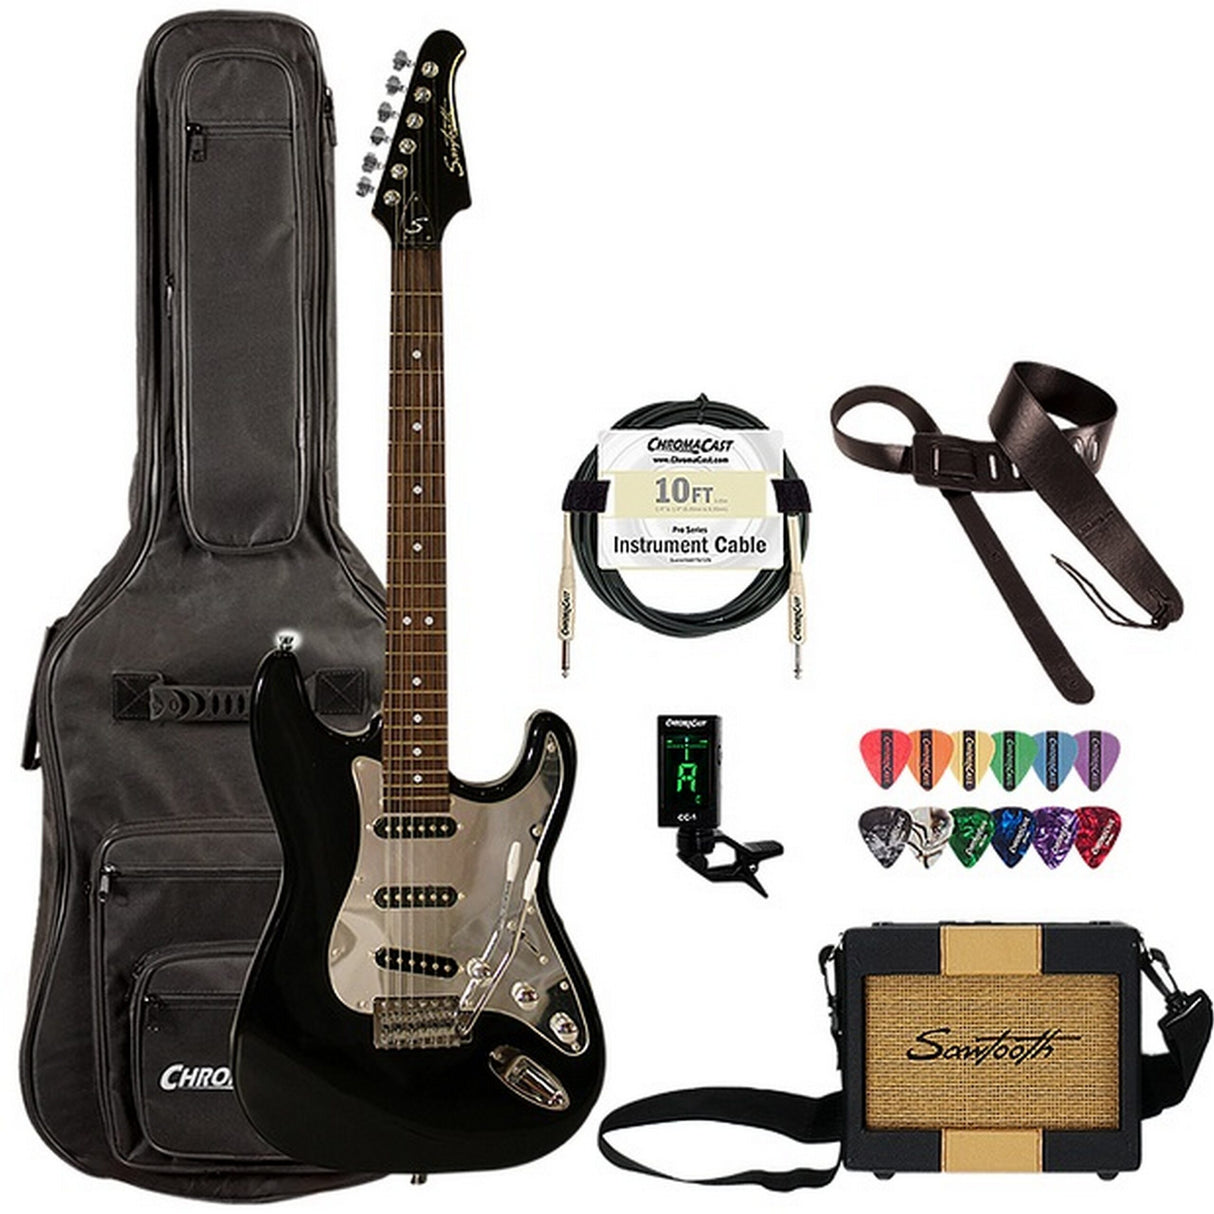 Sawtooth ST-ES-BKC-TRAVEL ES Series Electric Guitar Travel Bundle with Amp, Gig Bag, Cable, Tuner and Pick, Black/Chrome